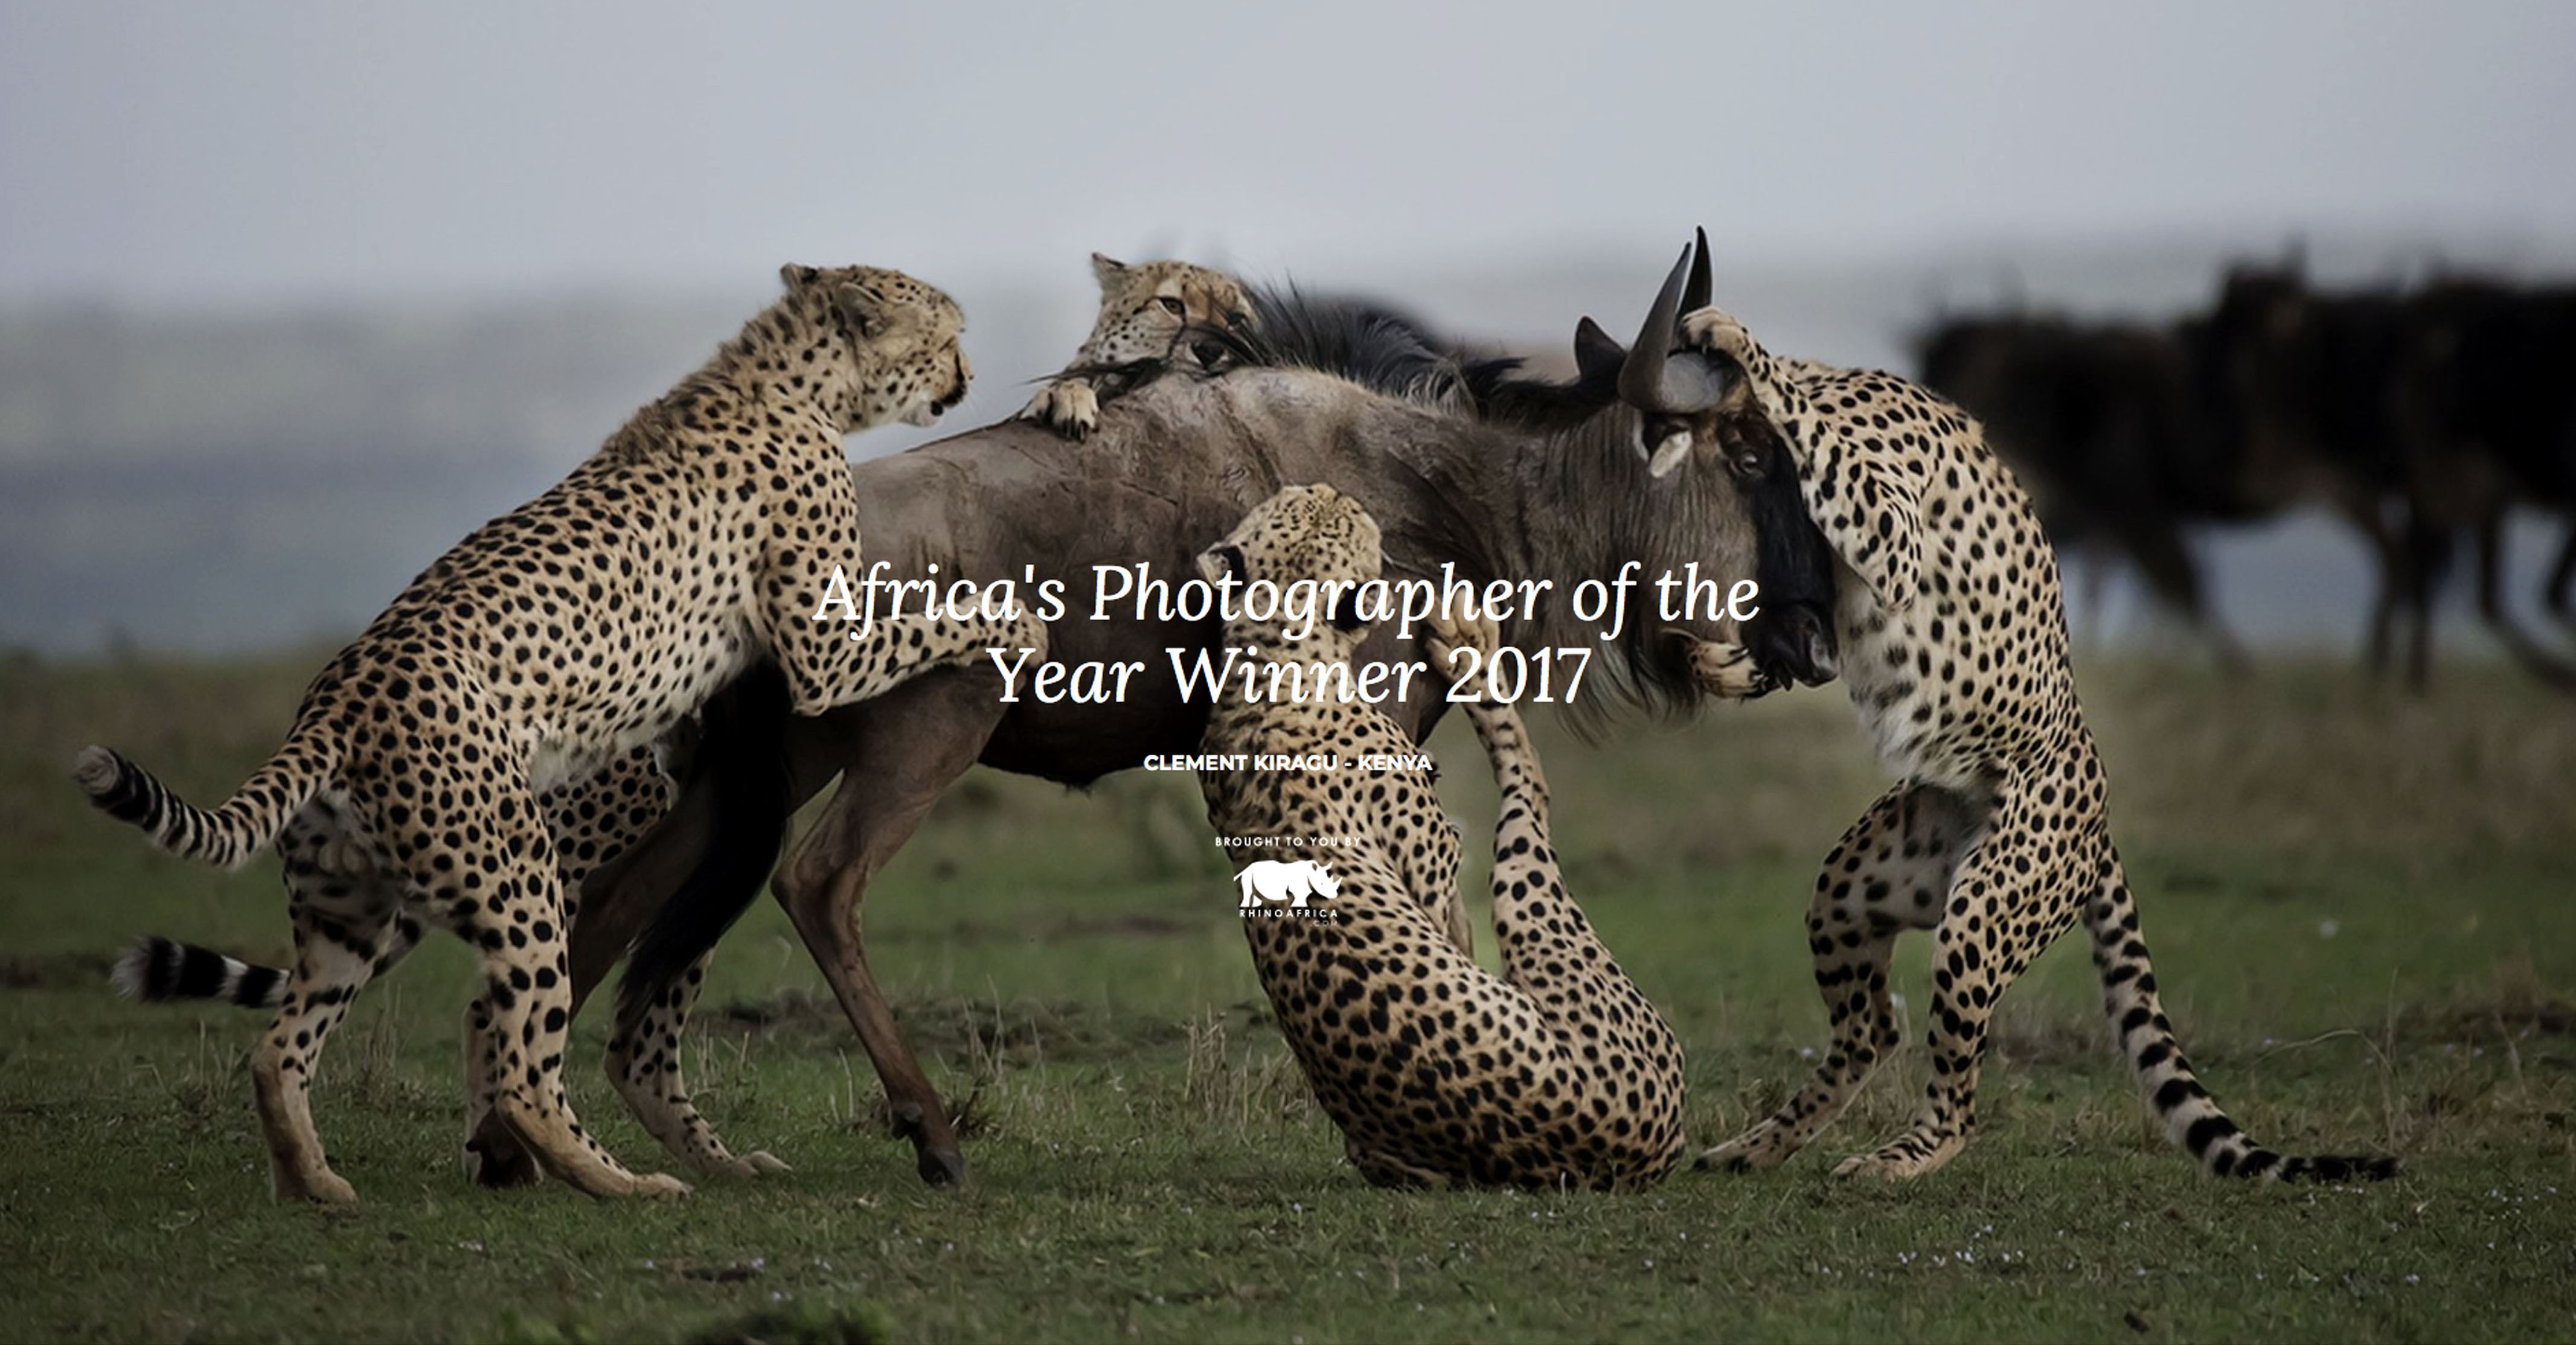 Africa's Photographer of the year 2017 - Clement Kiragu, Clement Wild, Wildlife Photography